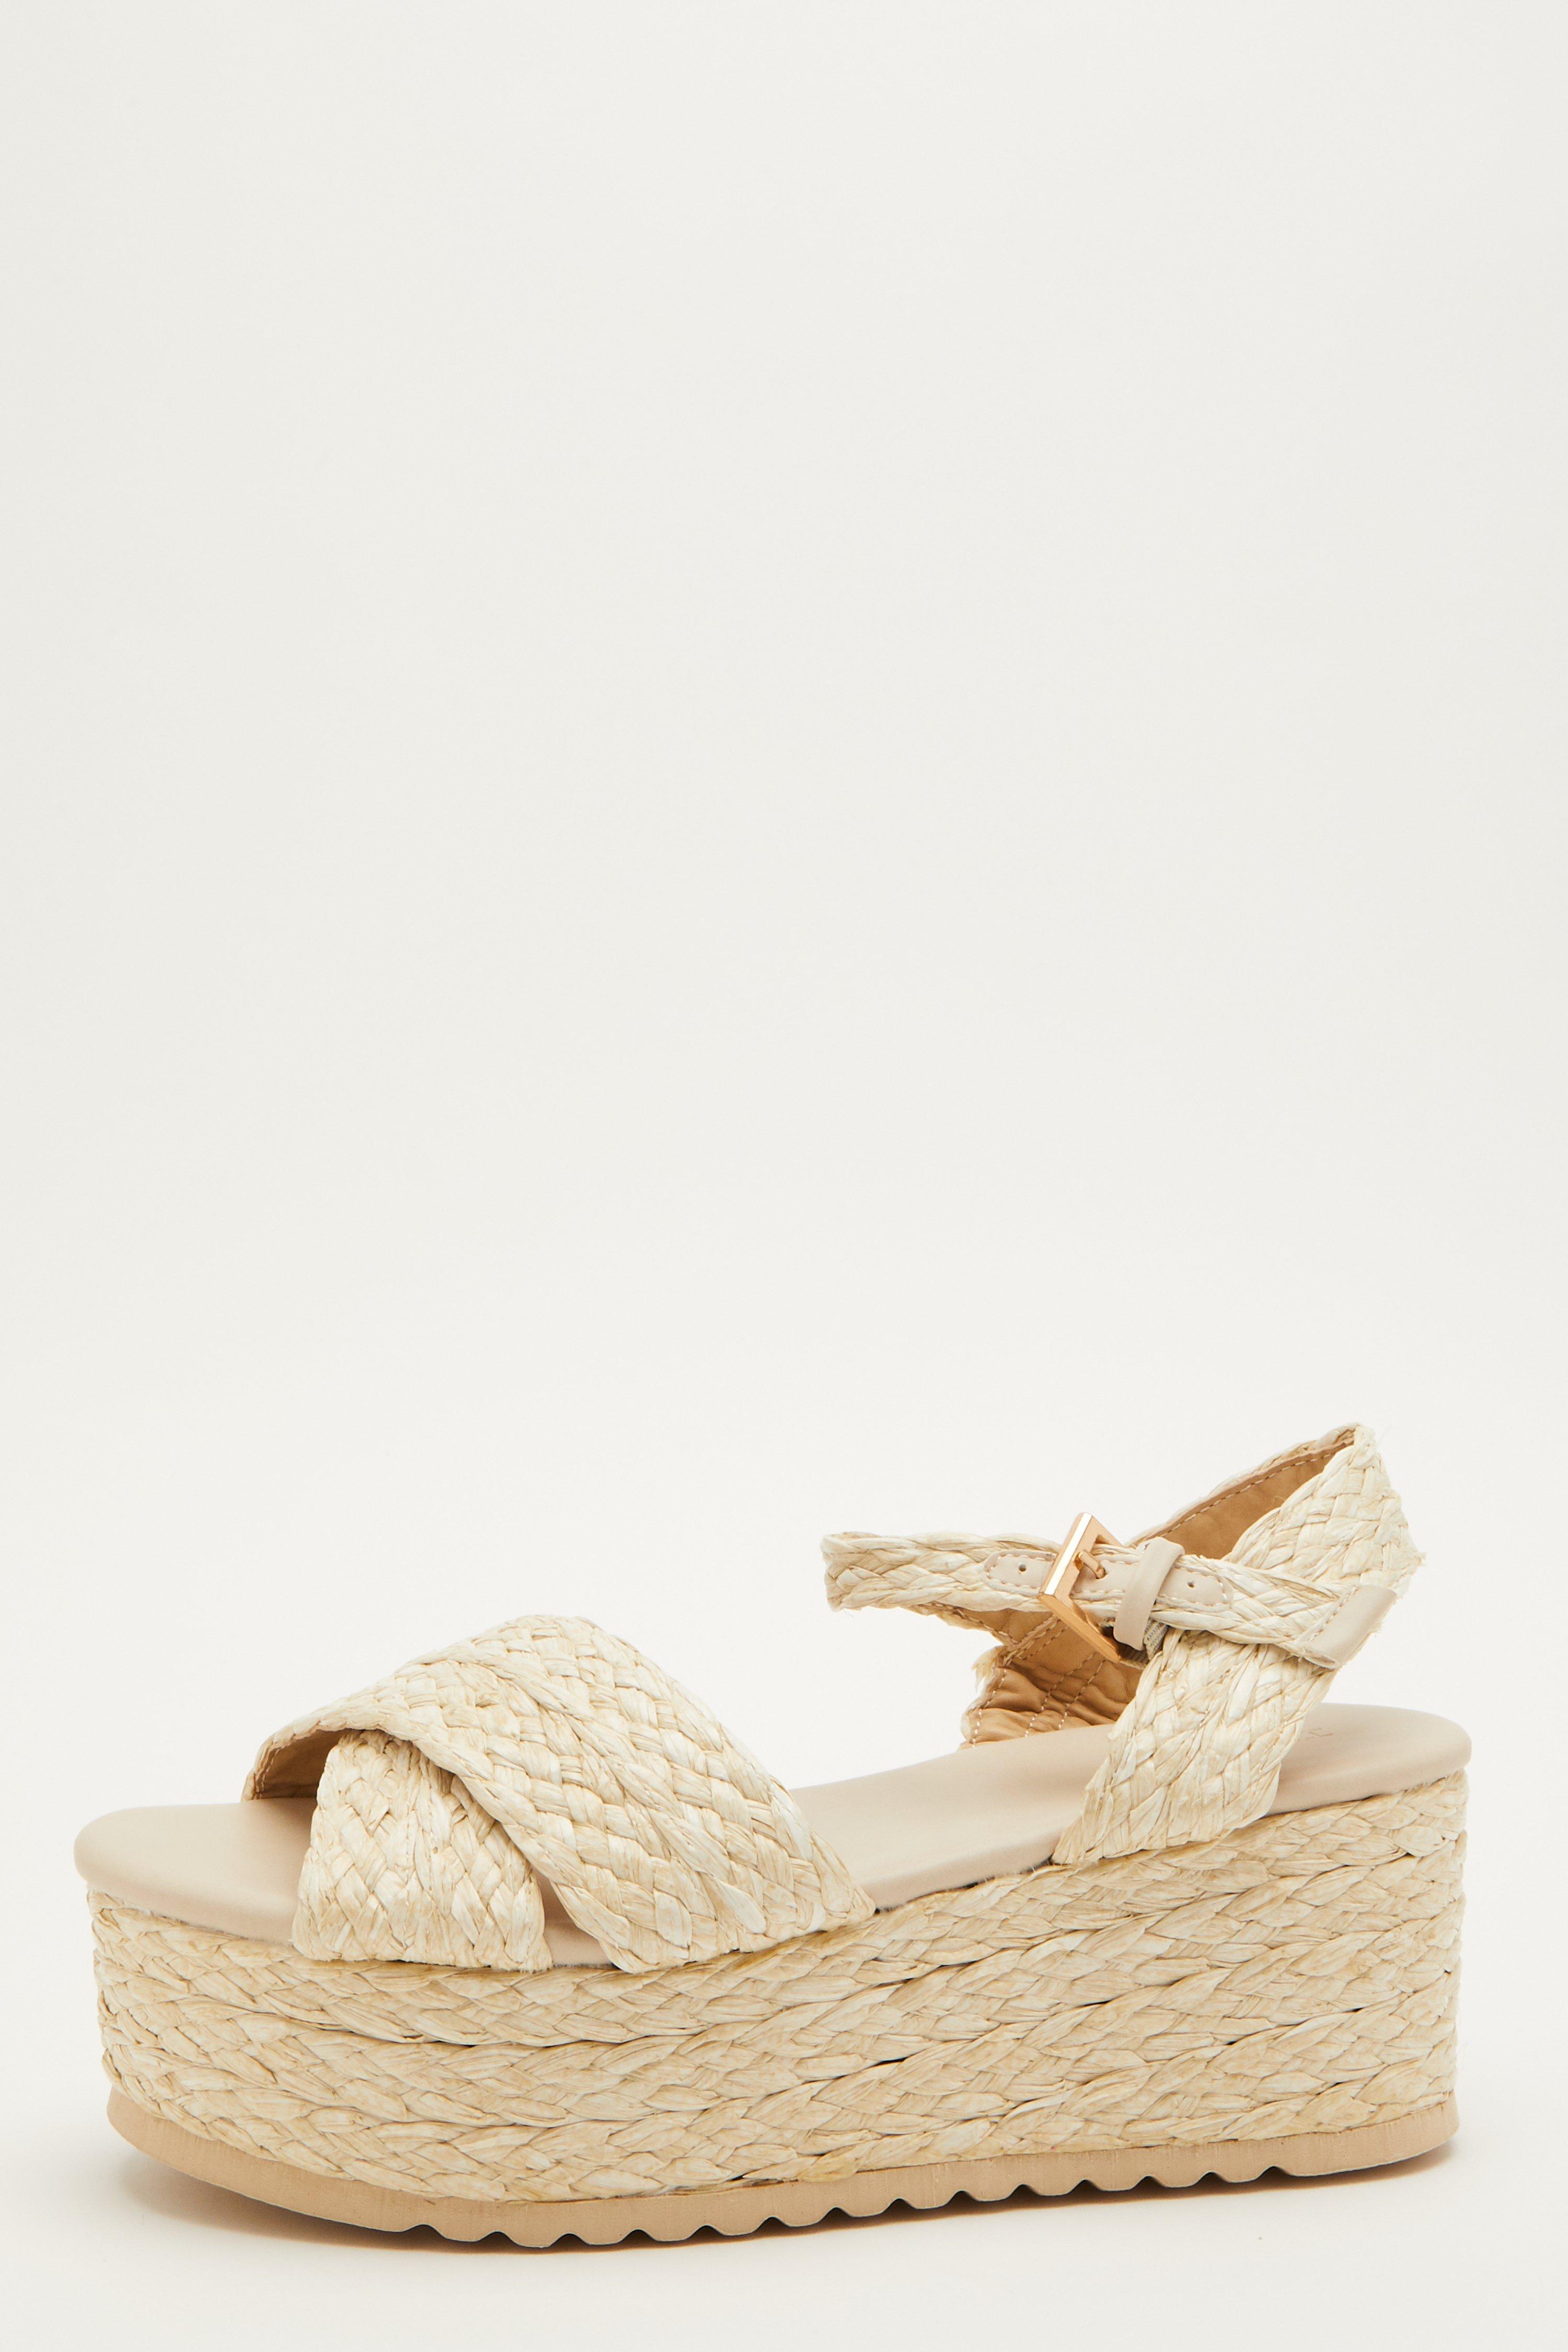 Nude Woven Wedge Sandals - Quiz Clothing